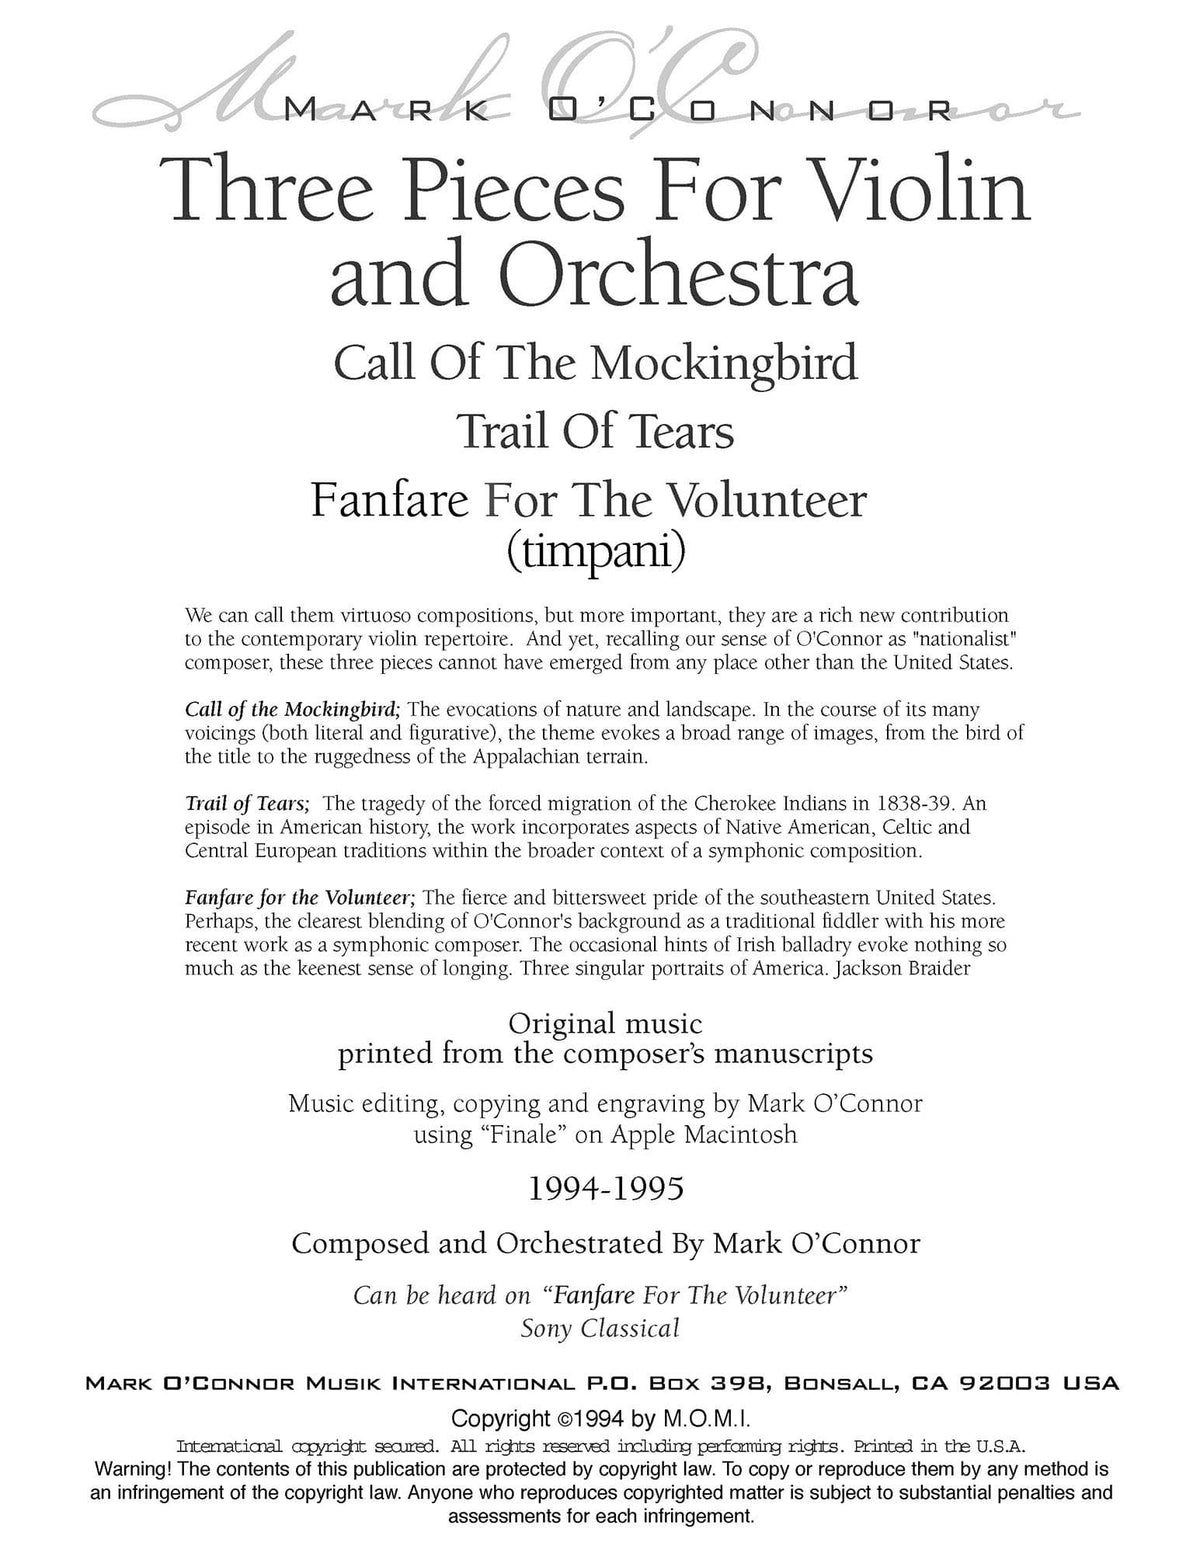 O'Connor, Mark - Three Pieces for Violin and Orchestra - Percussion - Digital Download